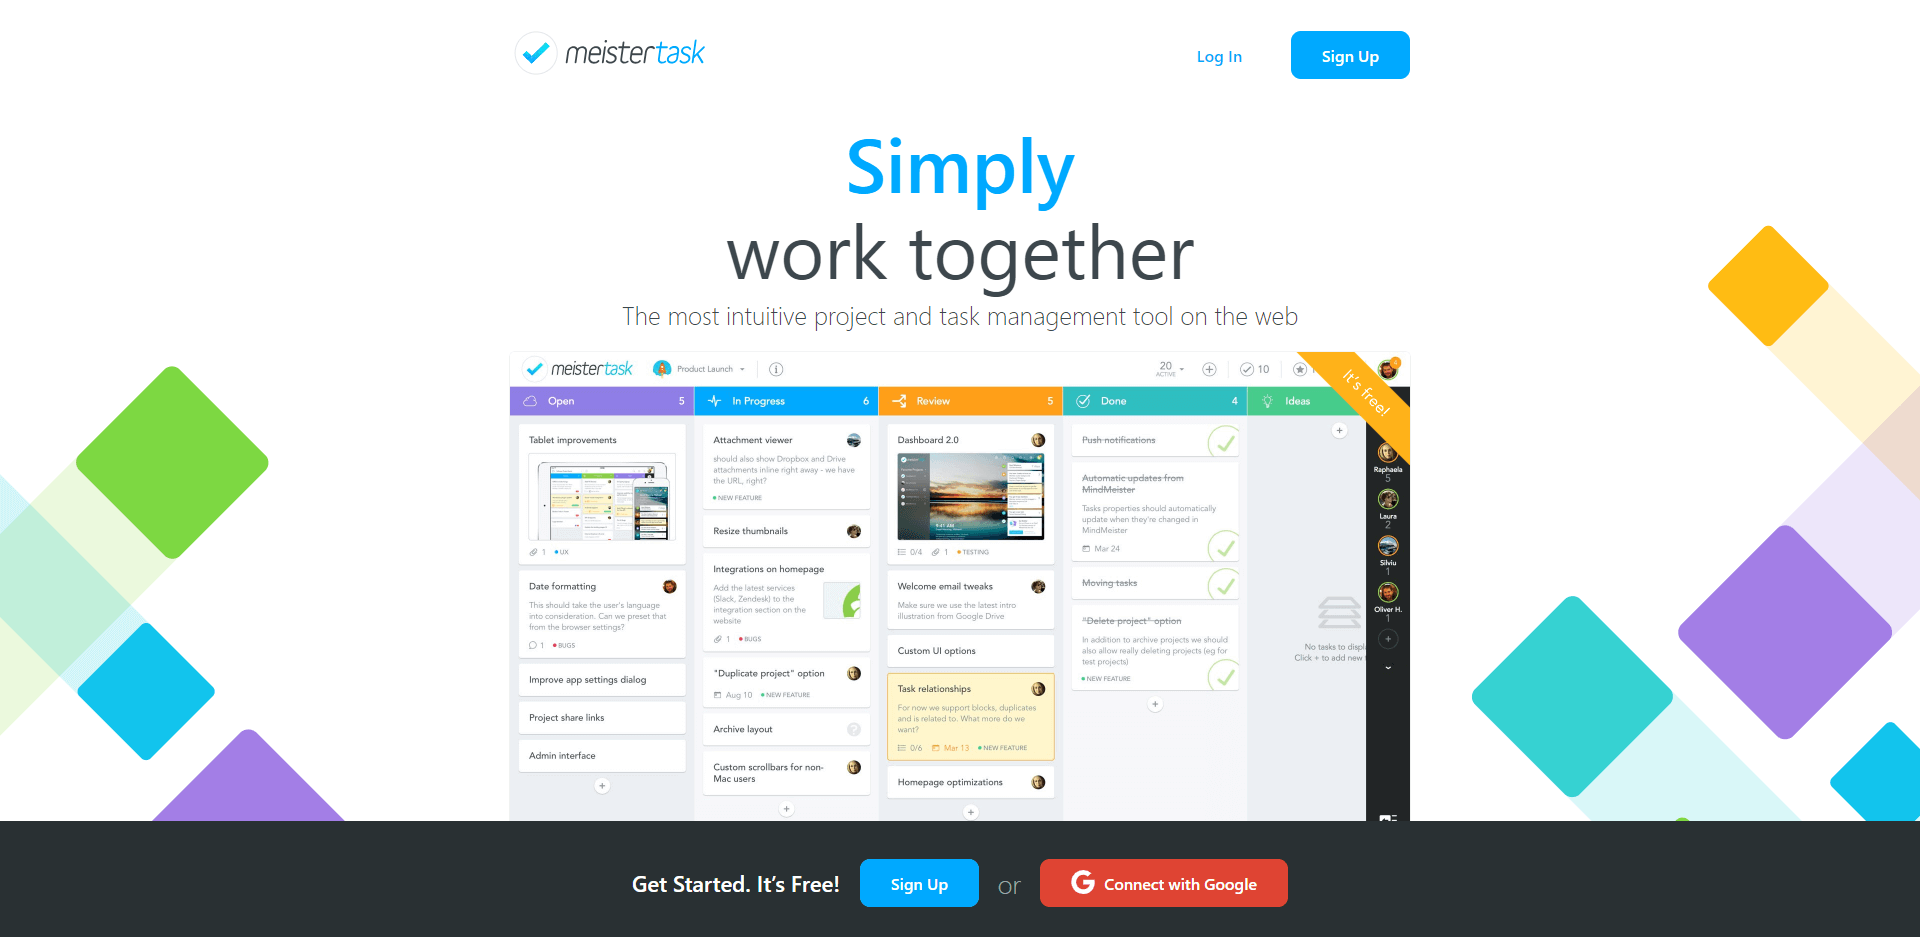 MeisterTask: simply work together